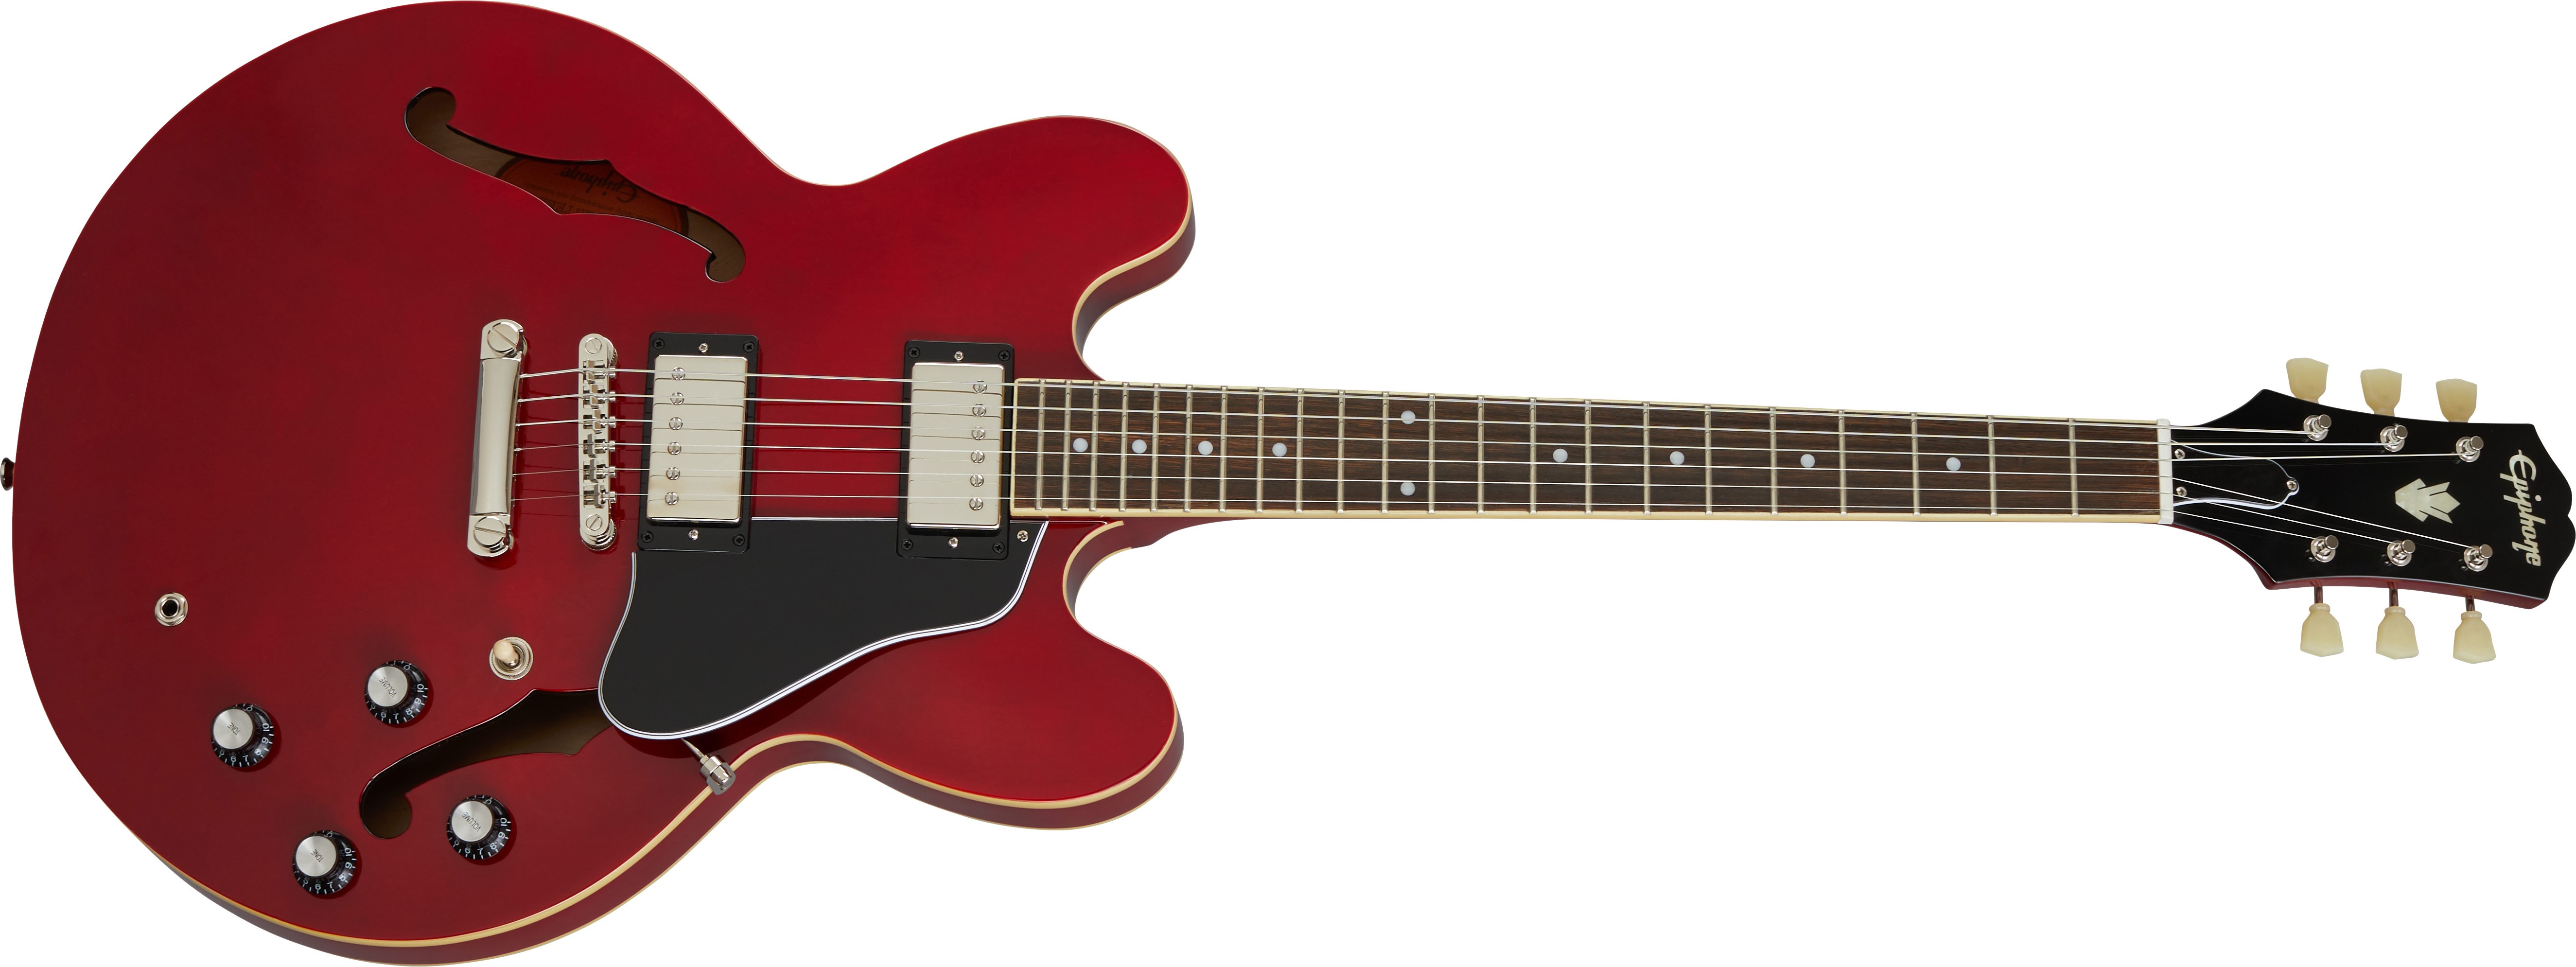 Epiphone Inspired by Gibson ES-335 Guitar